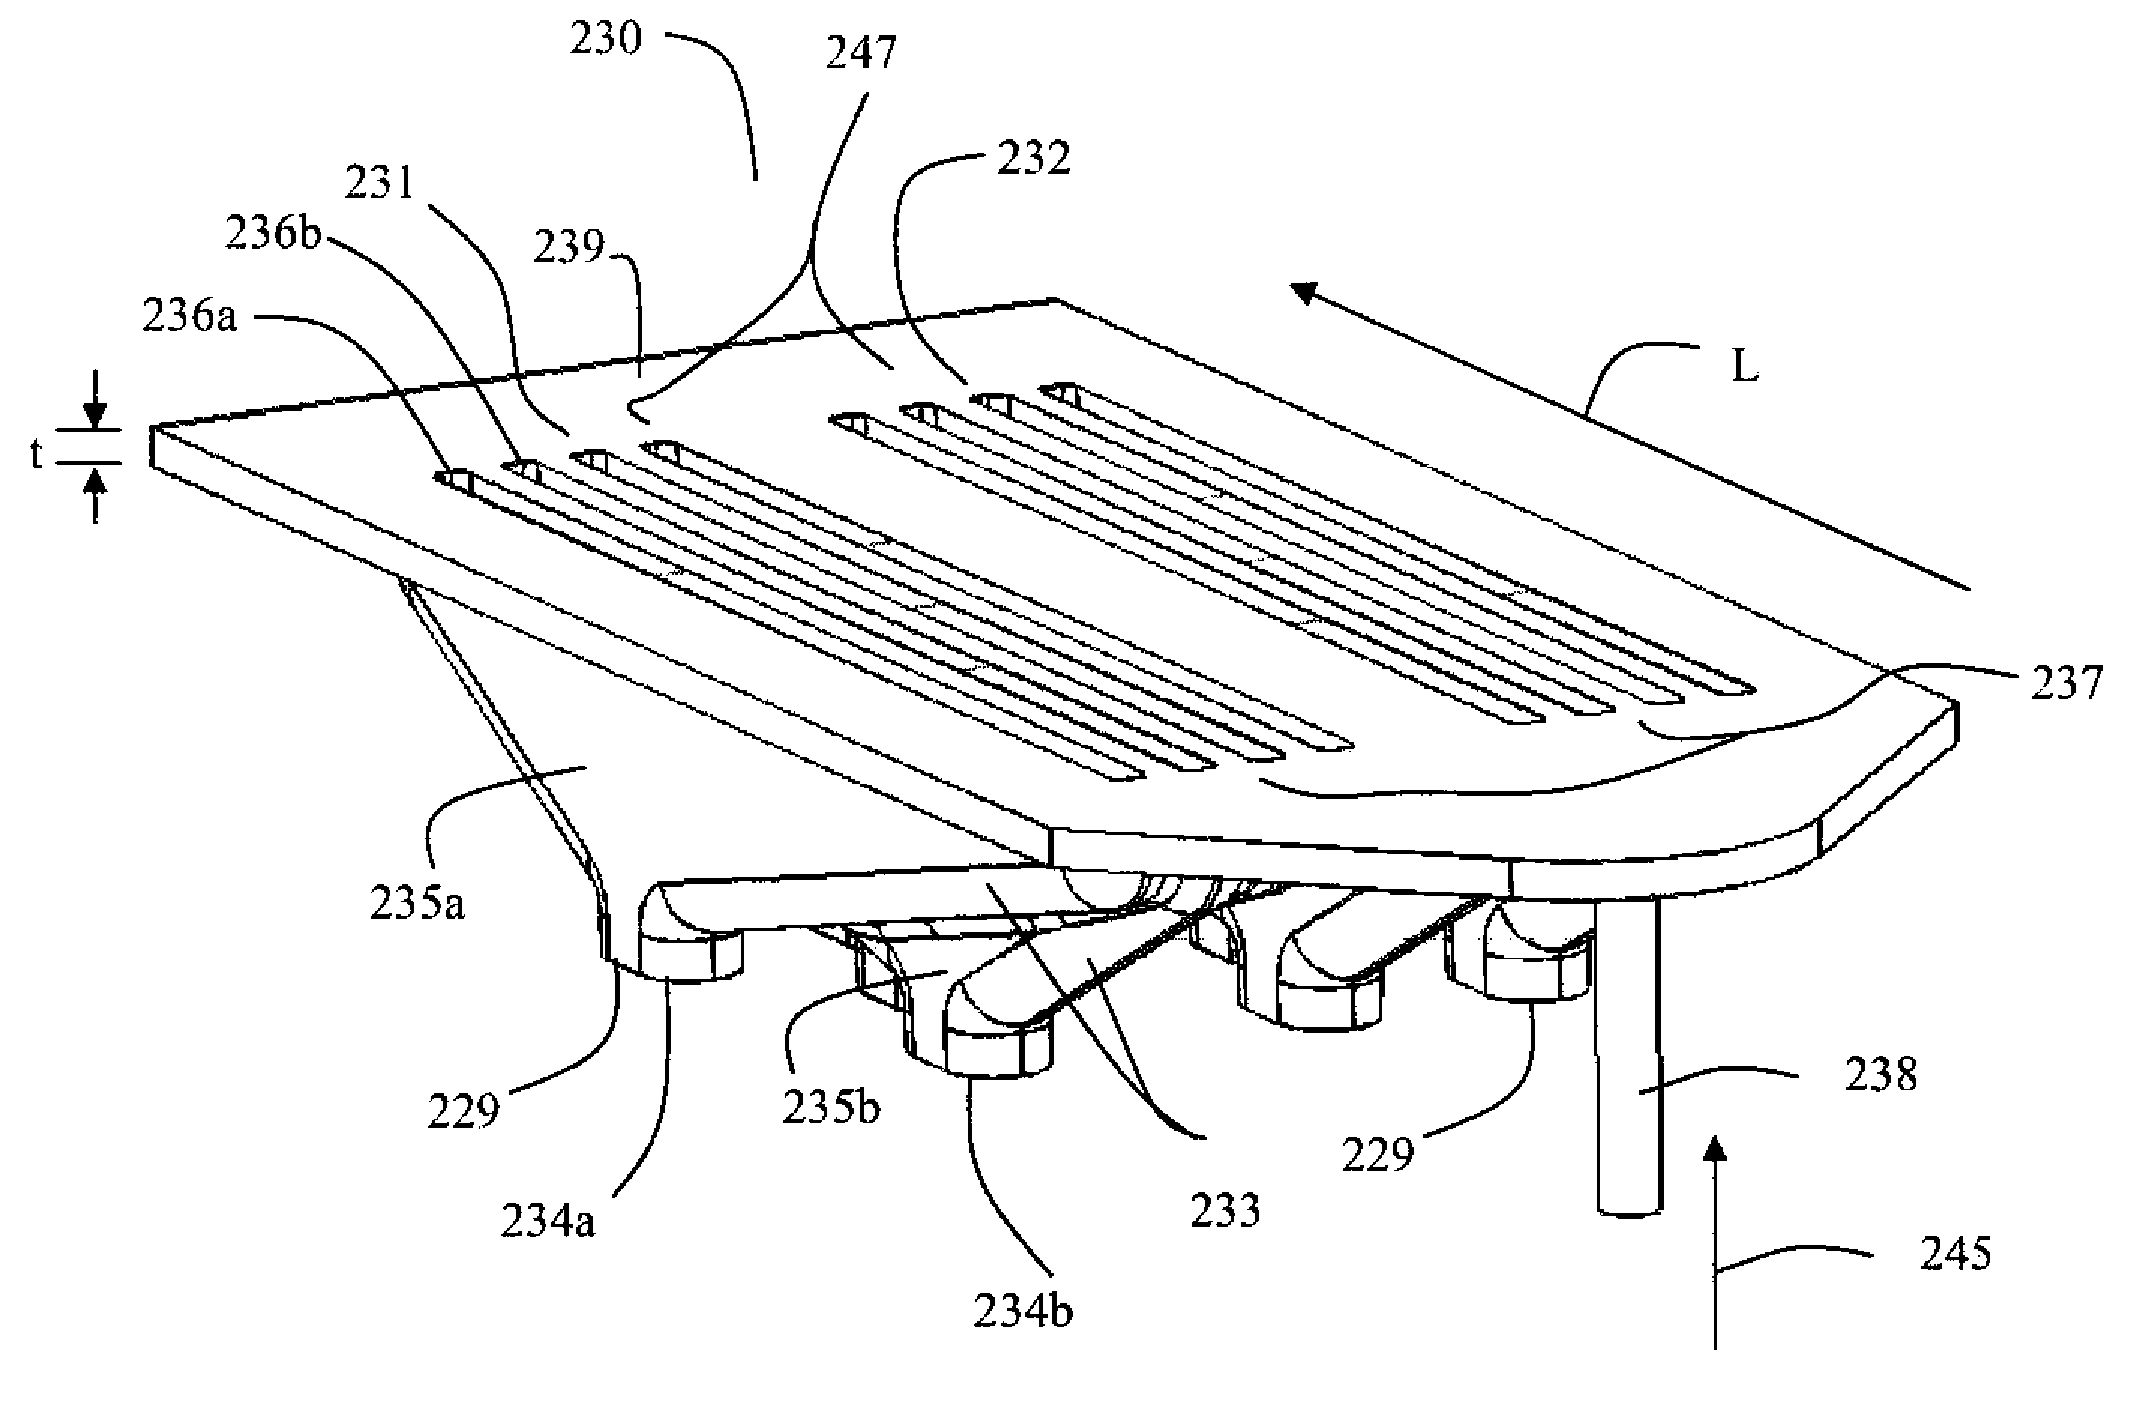 Fluid ejection assembly having a mounting substrate